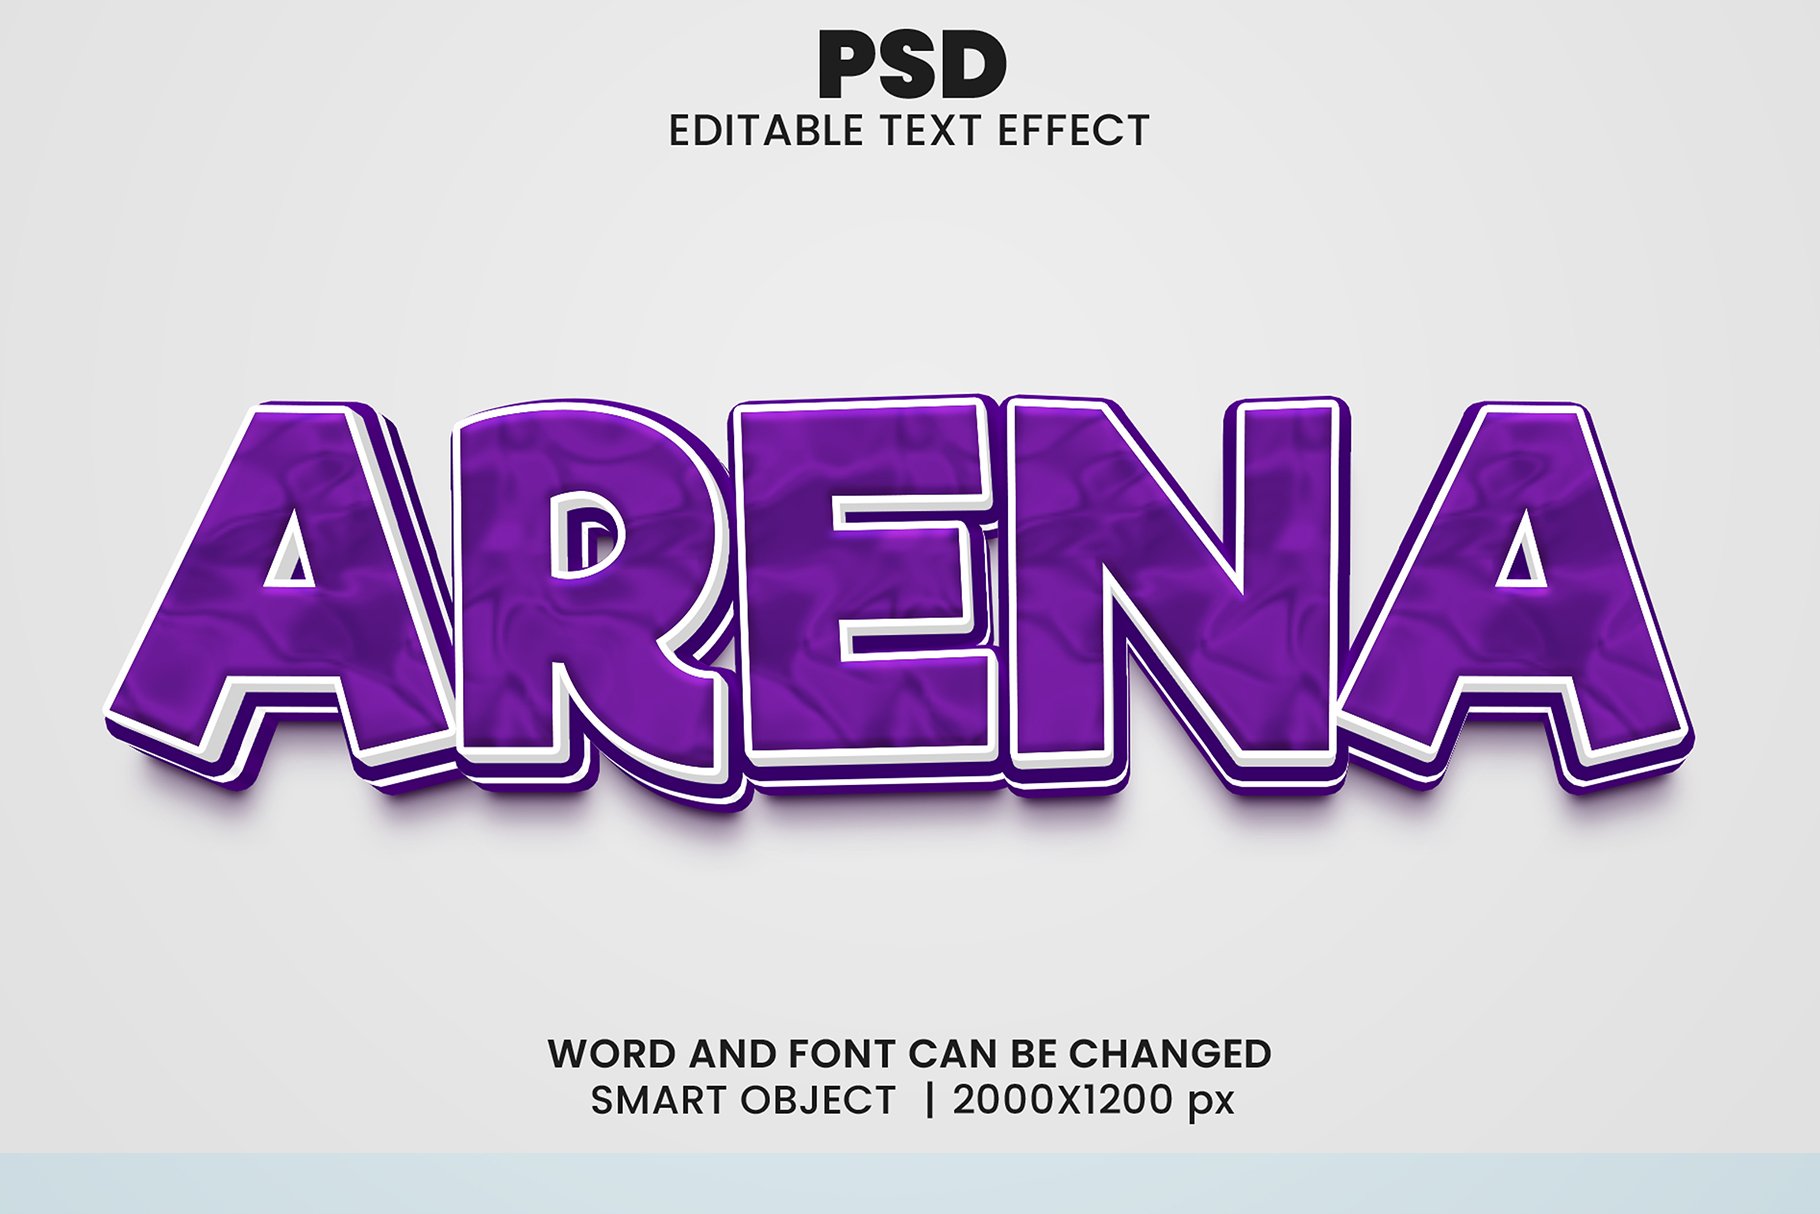 Arena 3d Editable Text Effect Stylecover image.